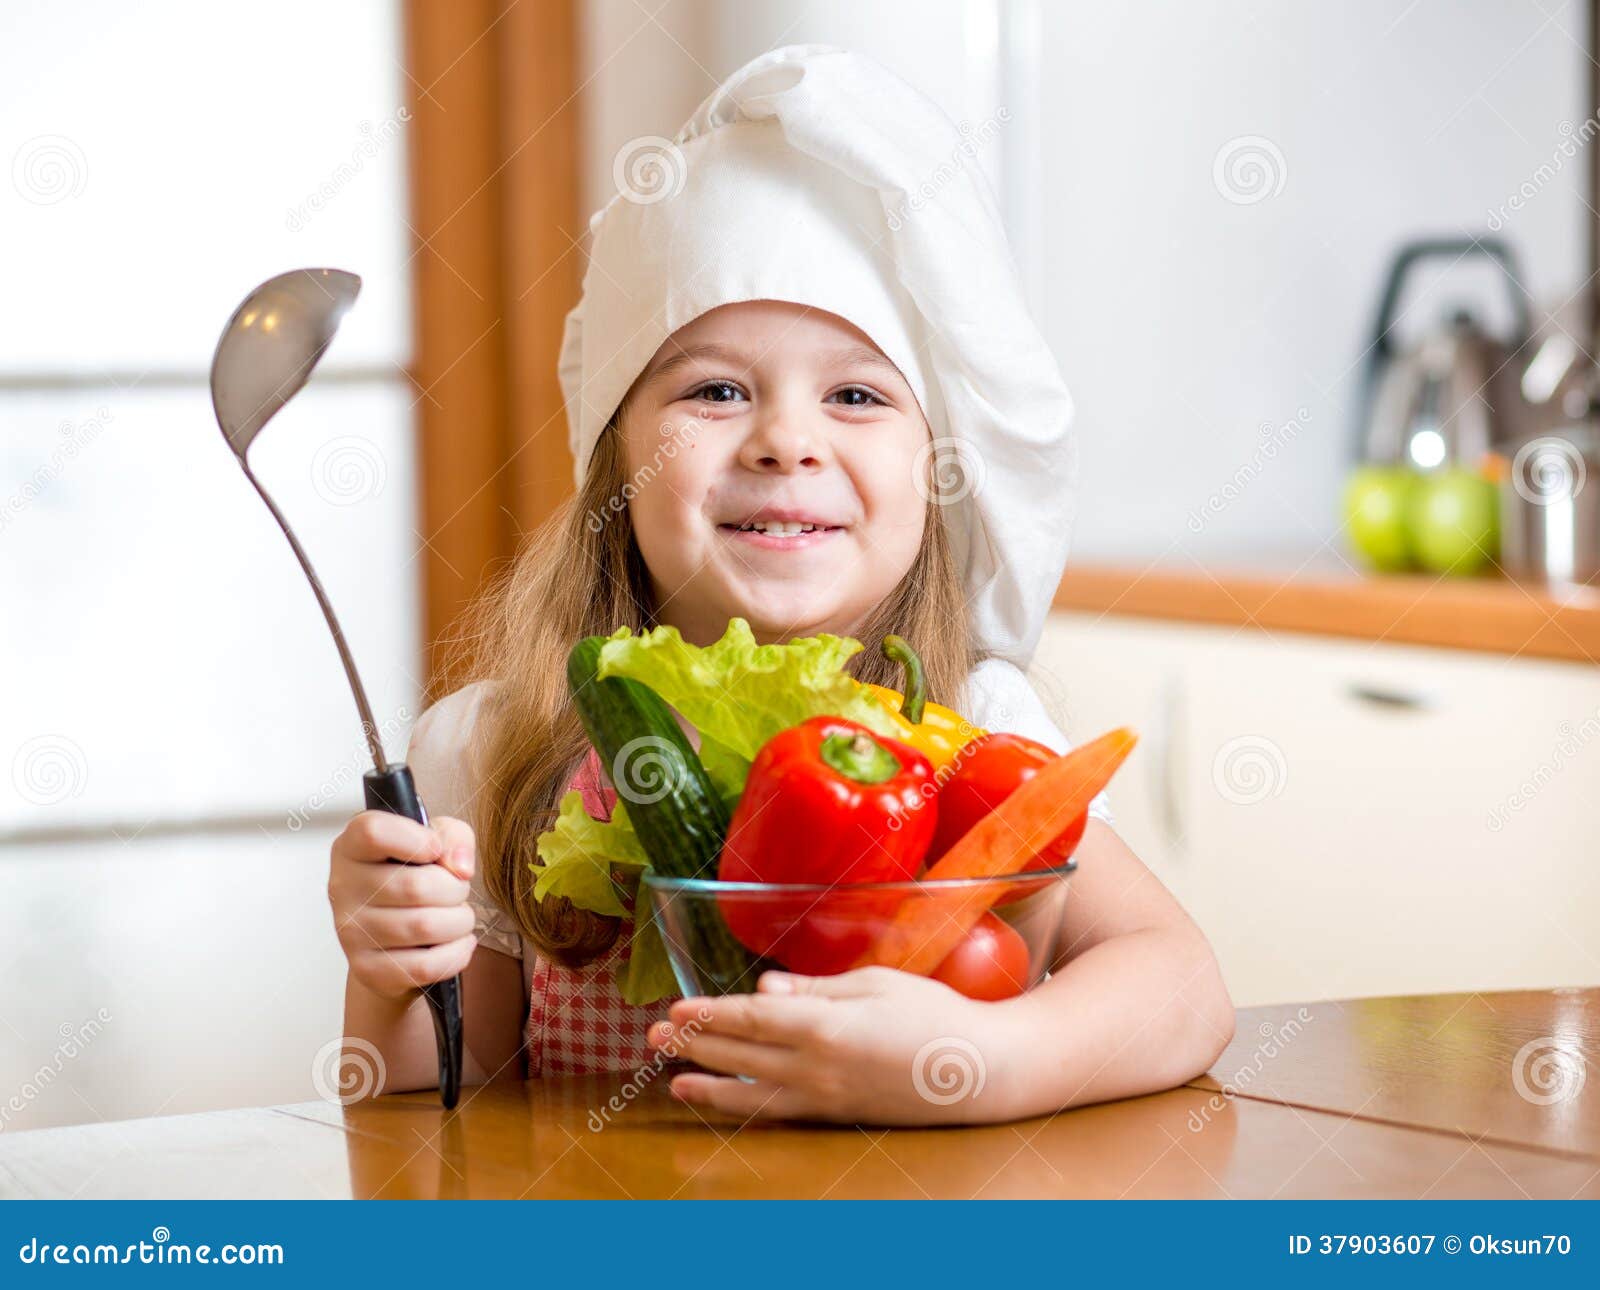 child weared as cook with vegetables at kitchen